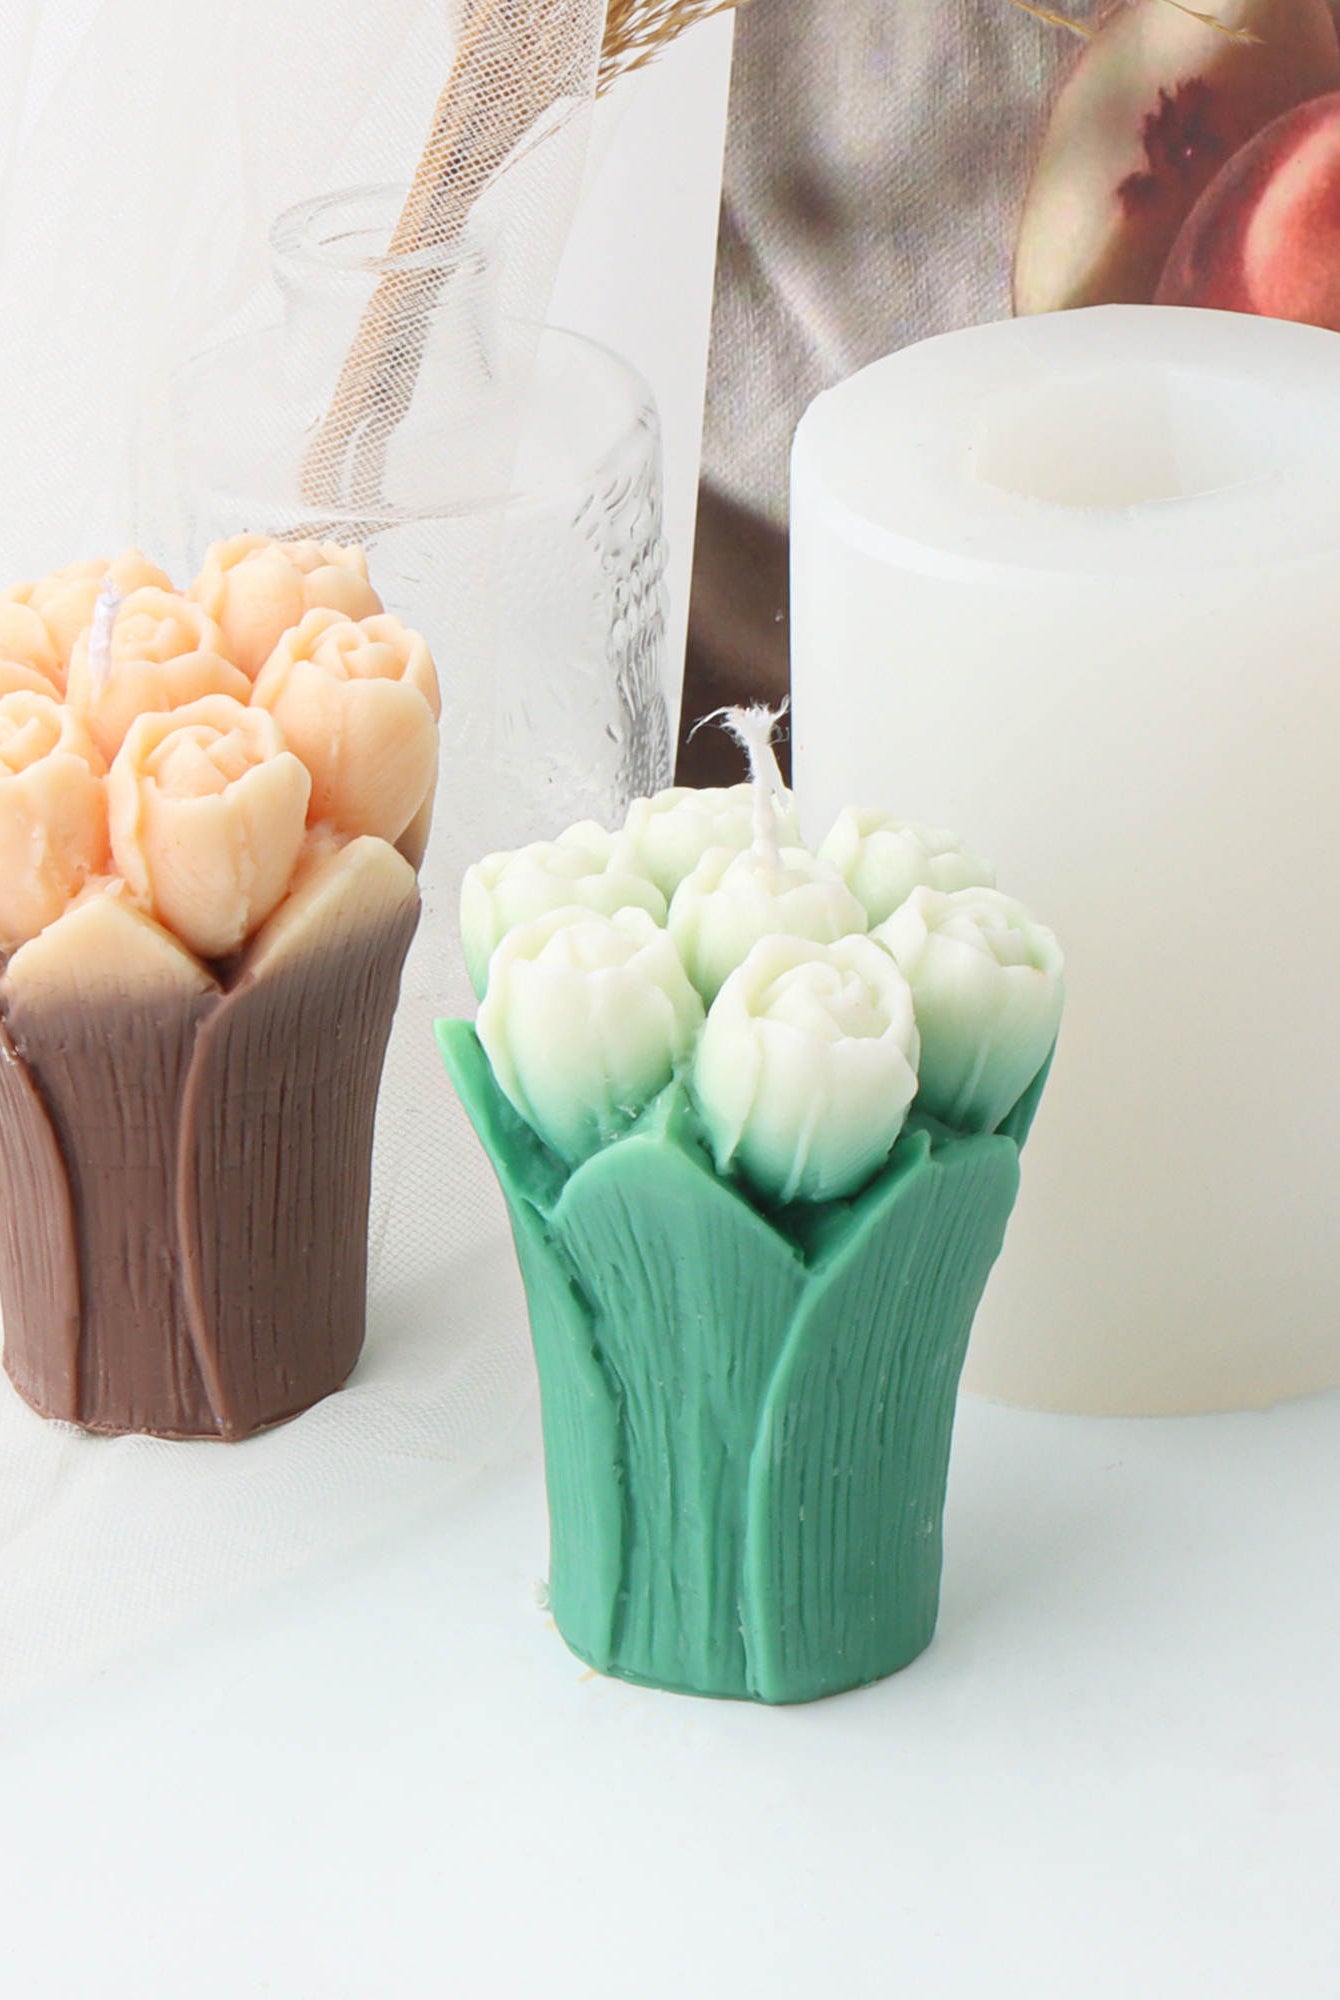 Tulip Bouquet Candle Mould 0 - Silicone Mould, Mold for DIY Candles. Created using candle making kit with cotton candle wicks and candle colour chips. Using soy wax for pillar candles. Sold by Myka Candles Moulds Australia